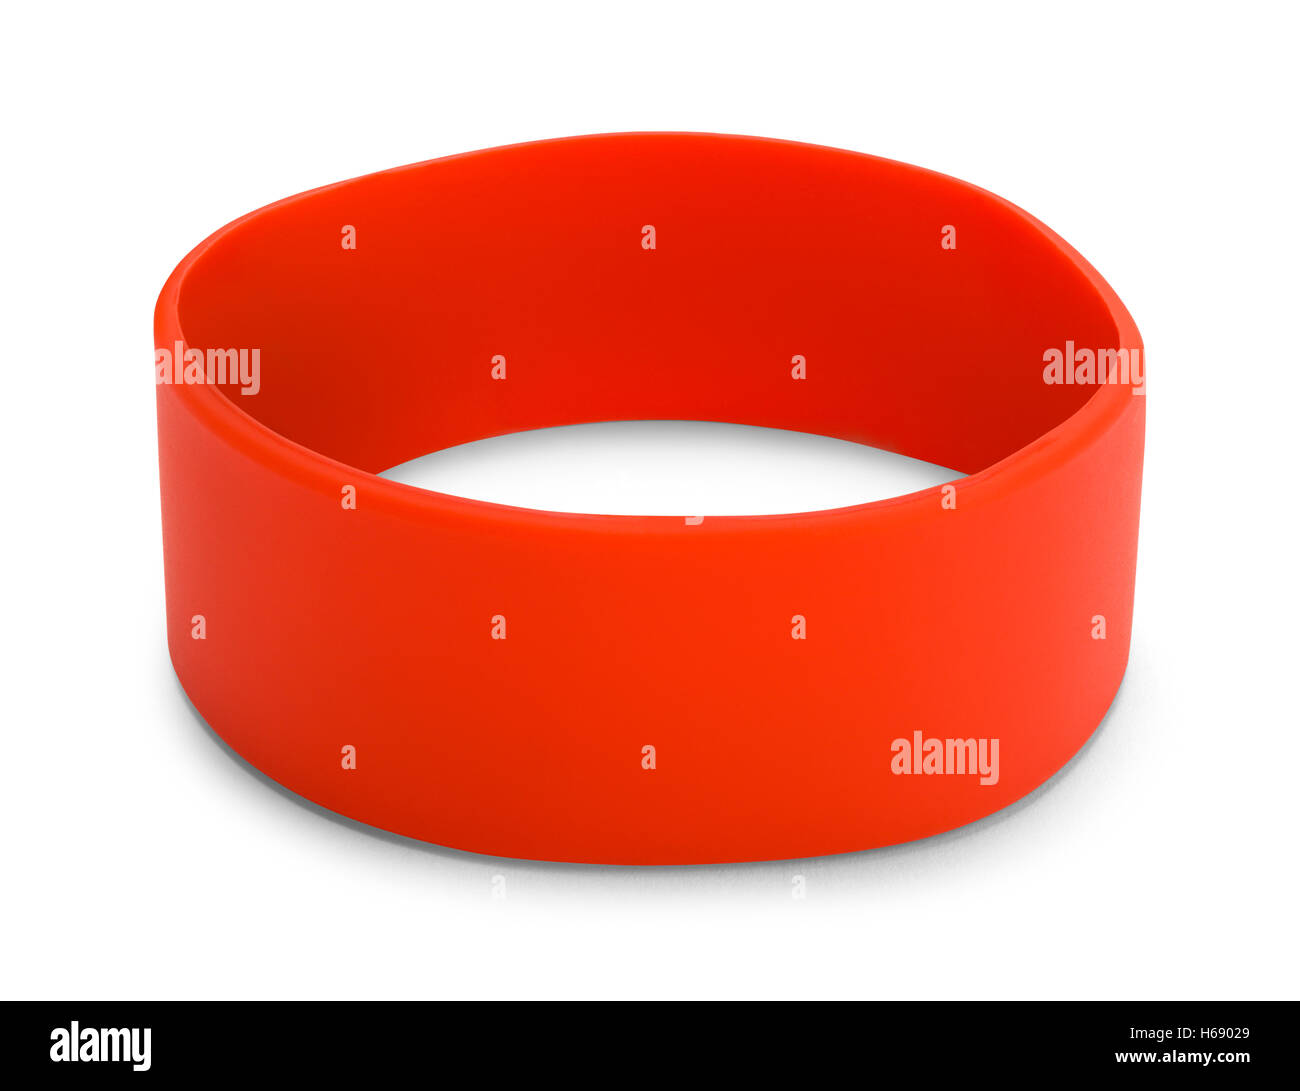 Large Red Rubber Bracelet with Copy Space Isolated on White Background. Stock Photo